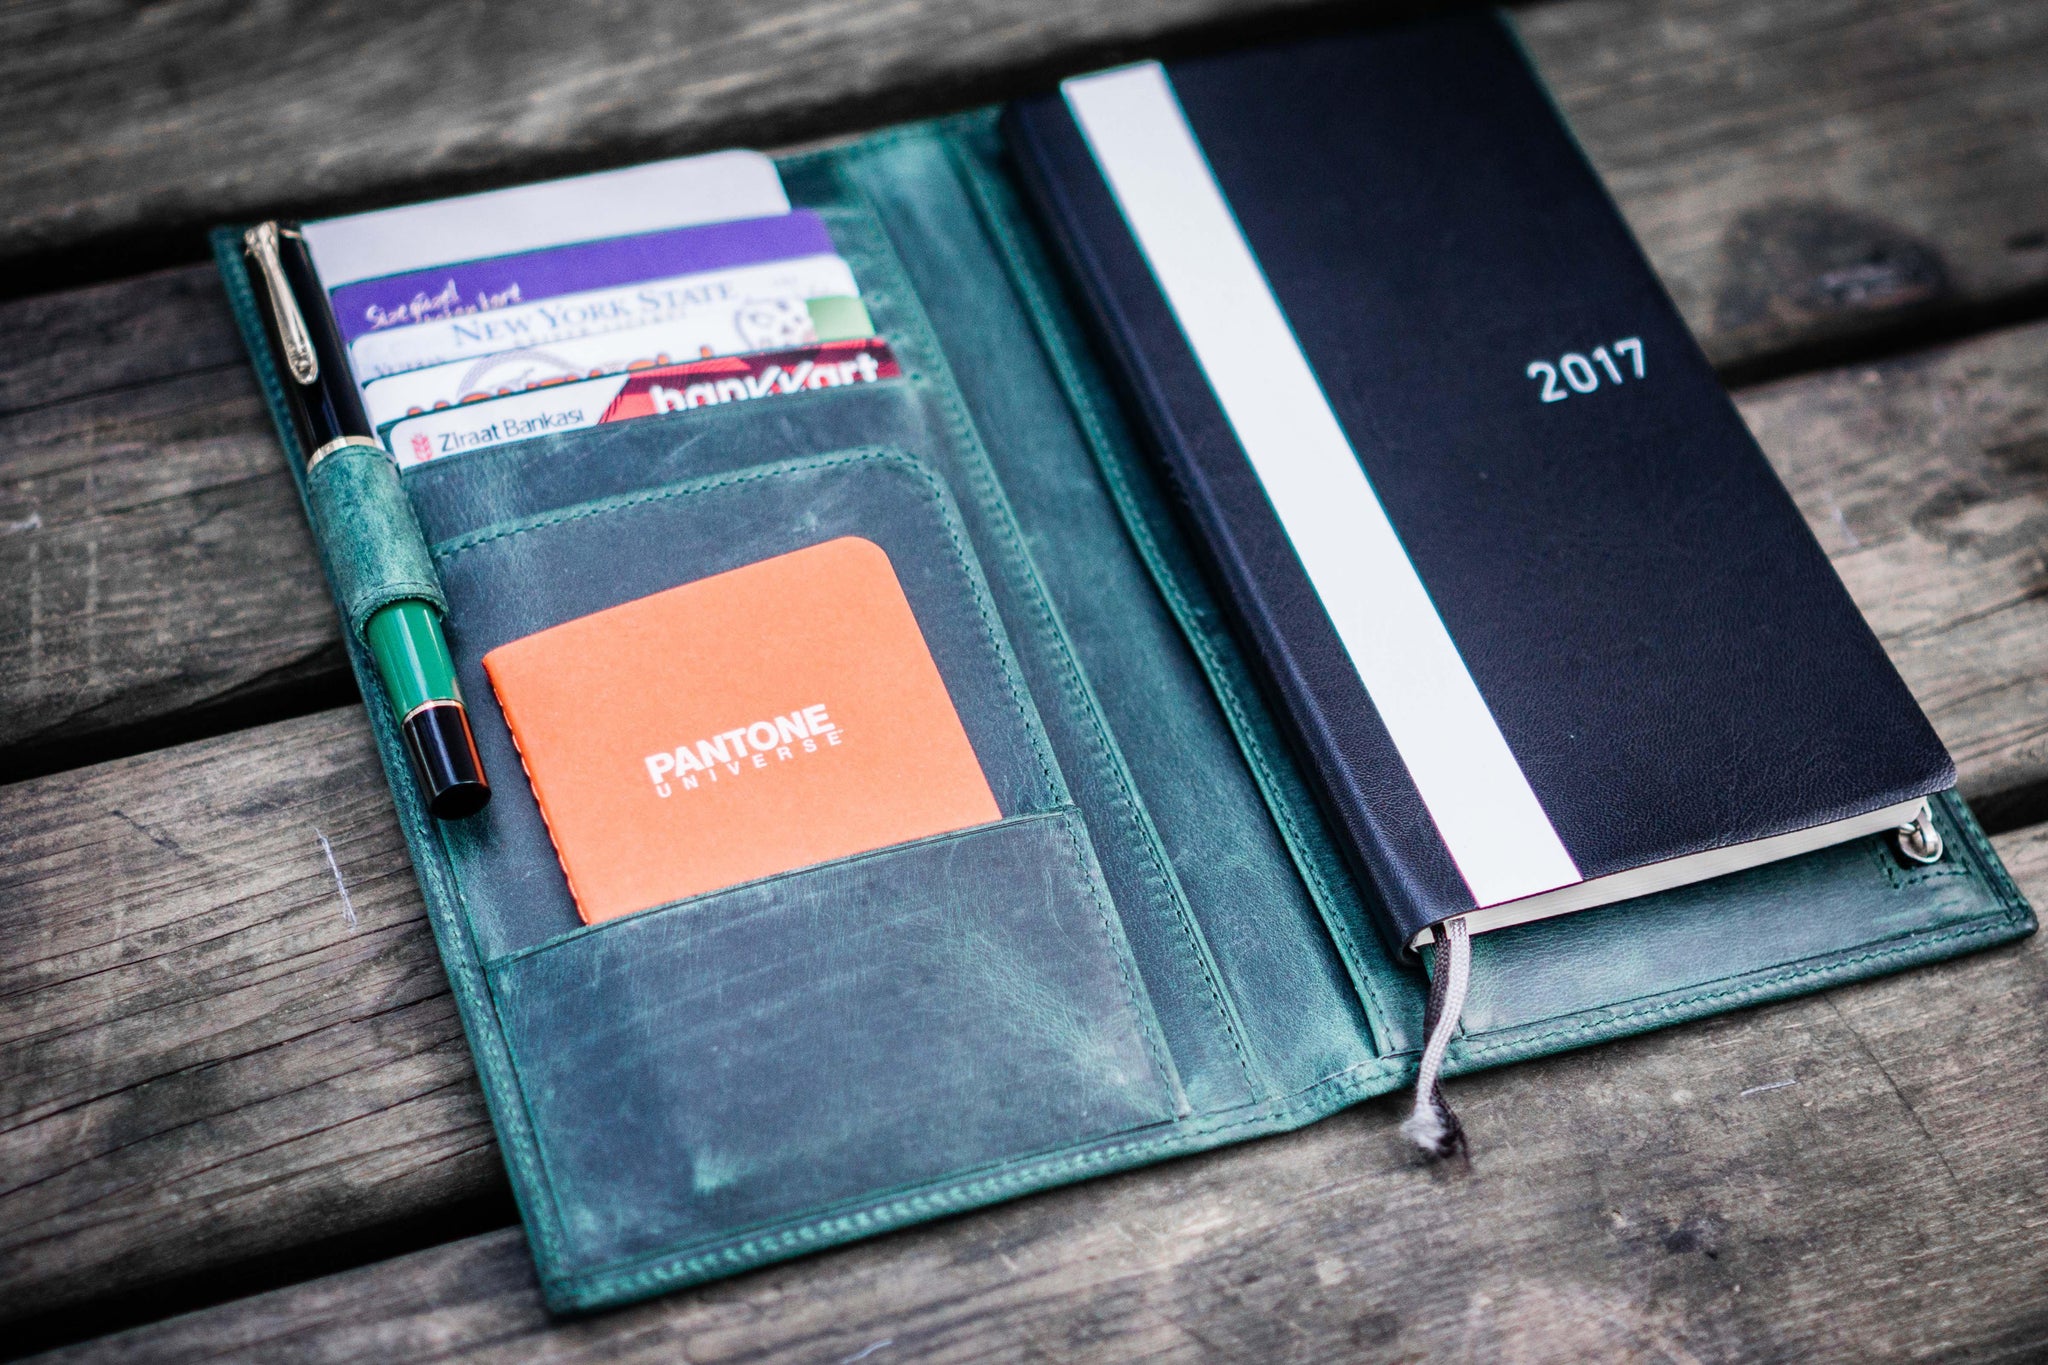 Leather Hobonichi Weeks Cover - Crazy Forest Green